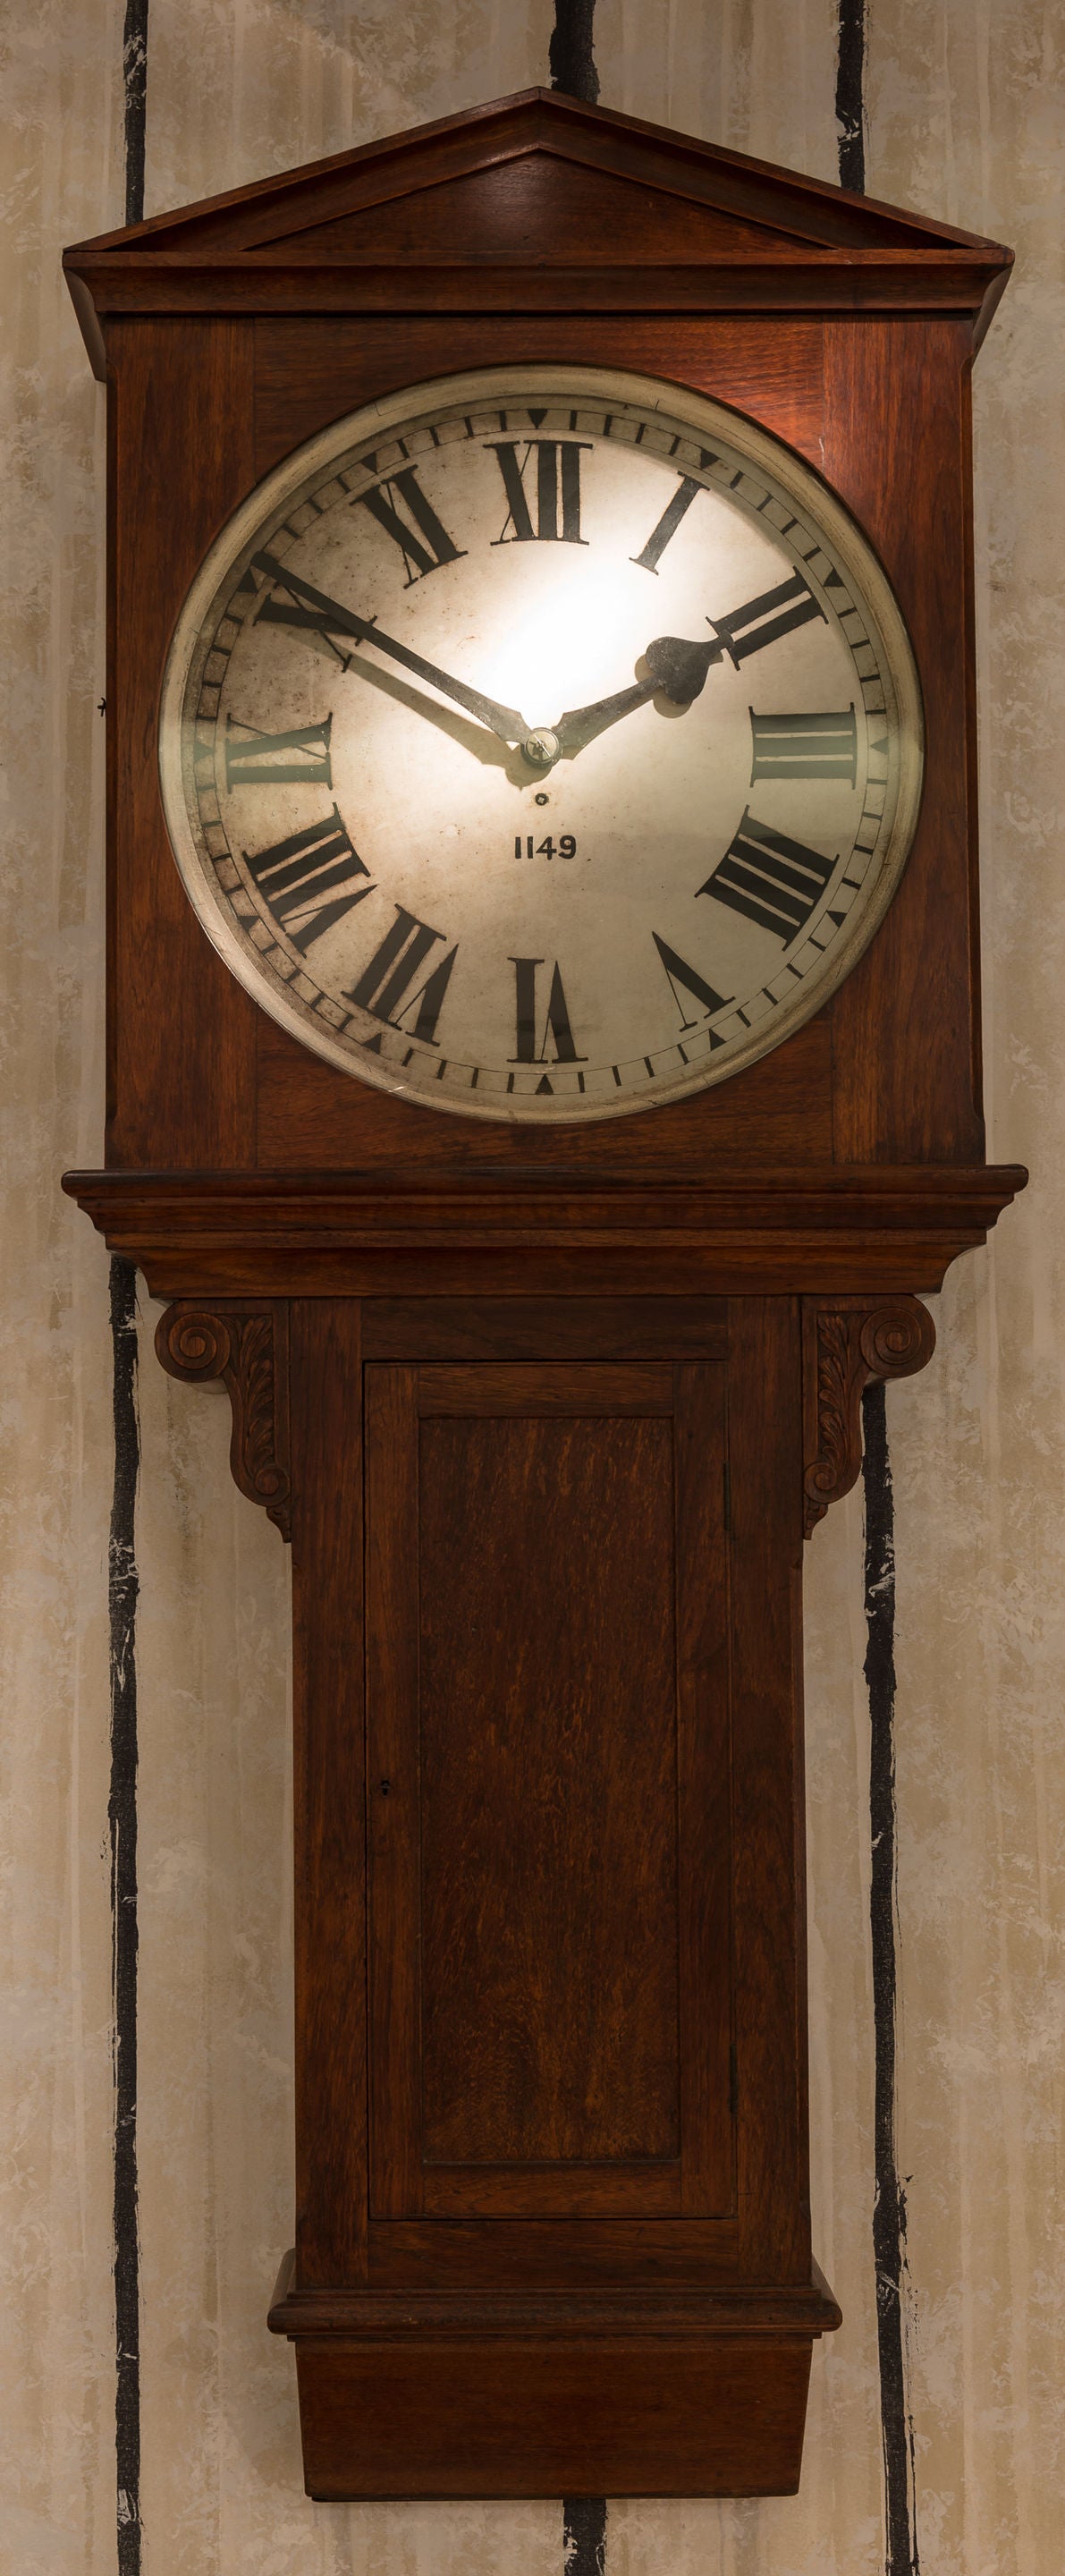 Rare and Magnificent Architectural Railway Clock